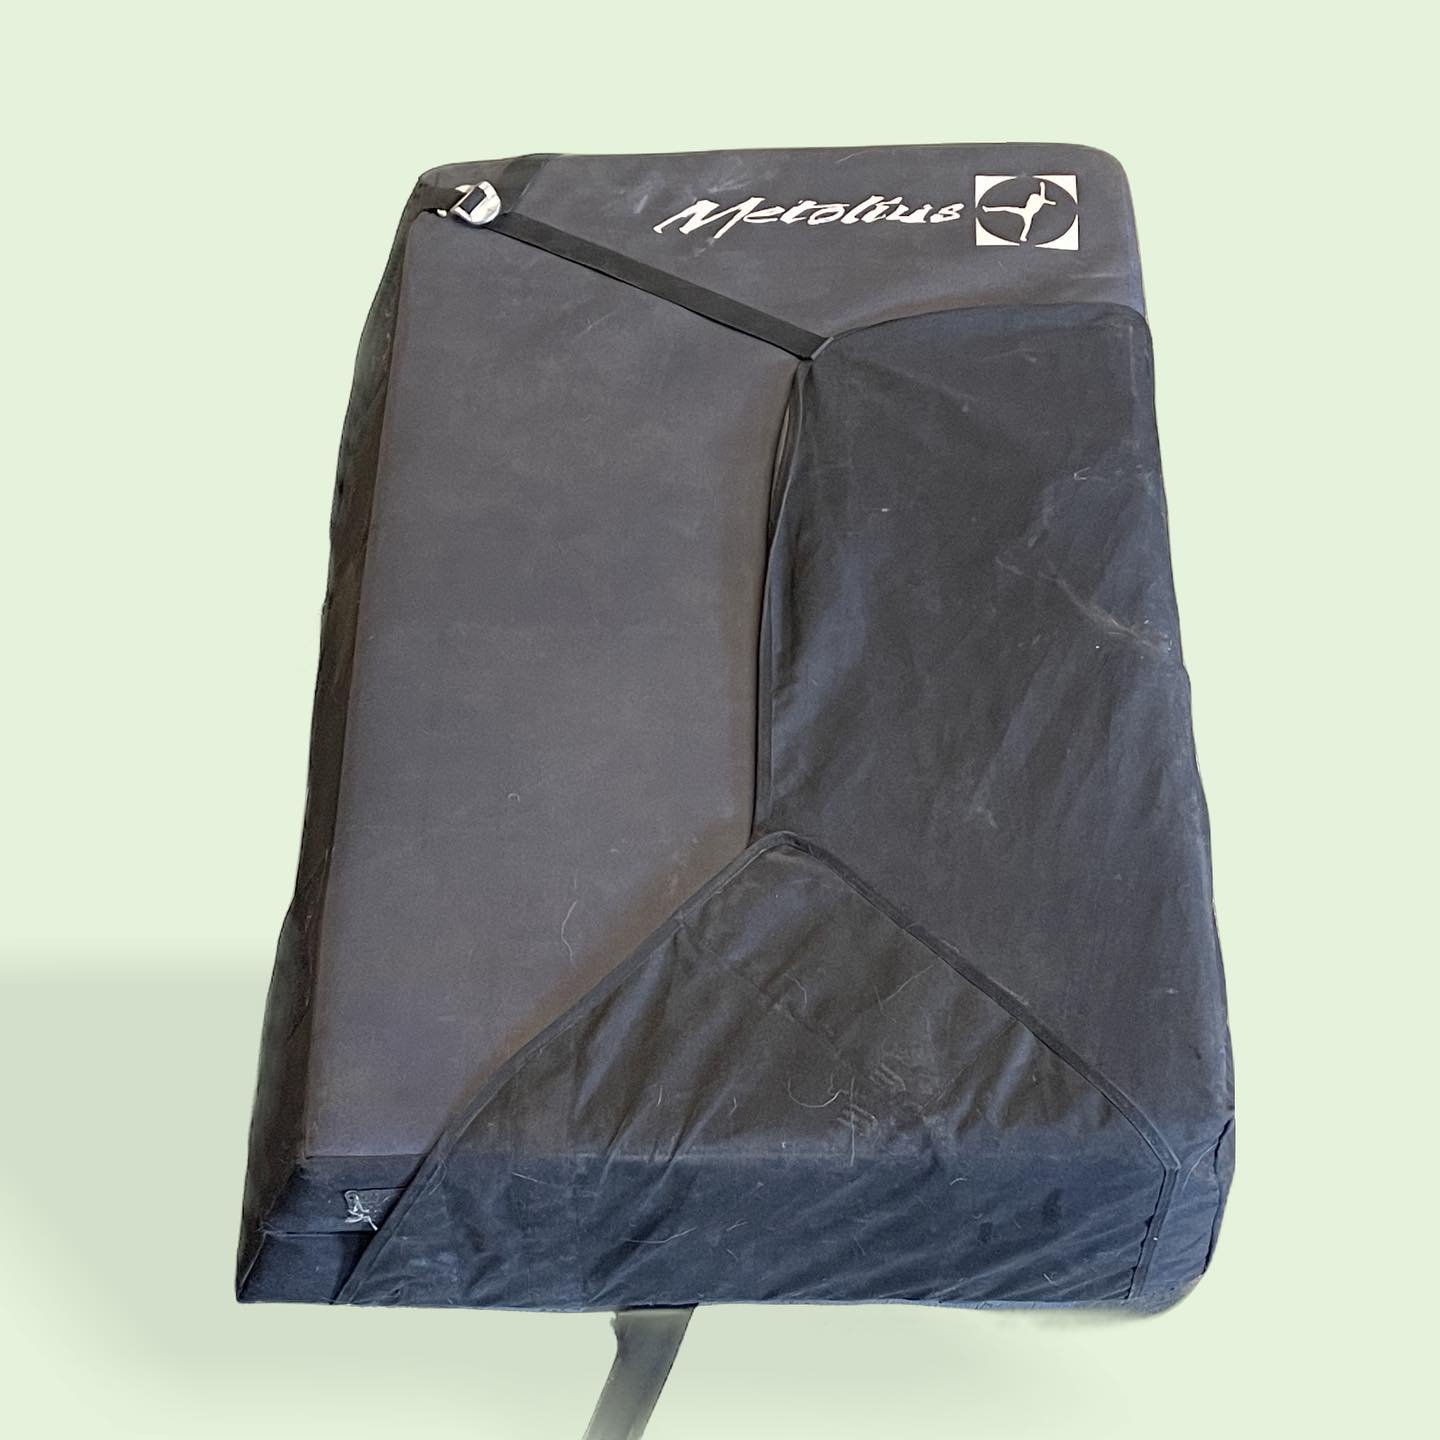 (SOLD)*36minutes!*Metolious Session II Crash Pad: $74
(SOLD)Metolious The Stomp Crash Pad: $84

Come down and snag these, they won&rsquo;t last long! Good condition- all straps and buckles are present and working, foam is not packed out!